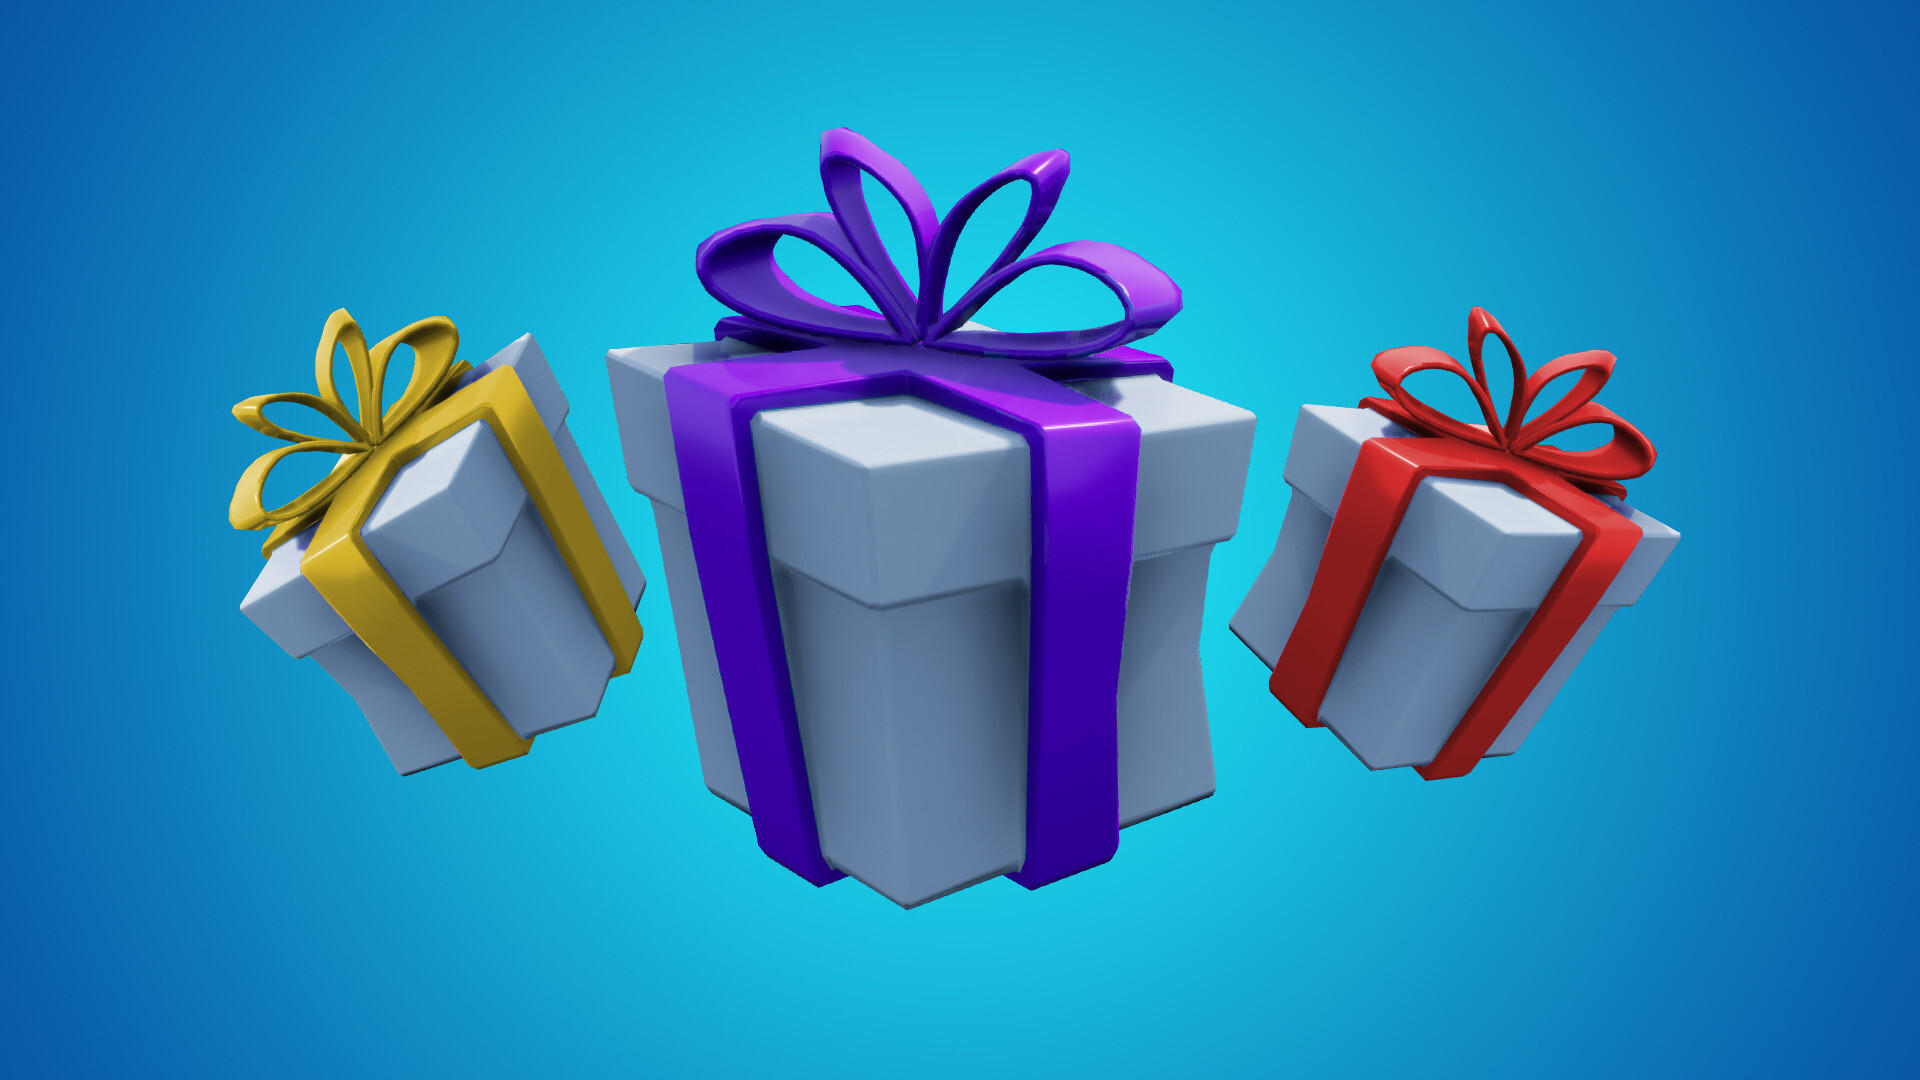 Is Rocket Leage Going to add Gifting?